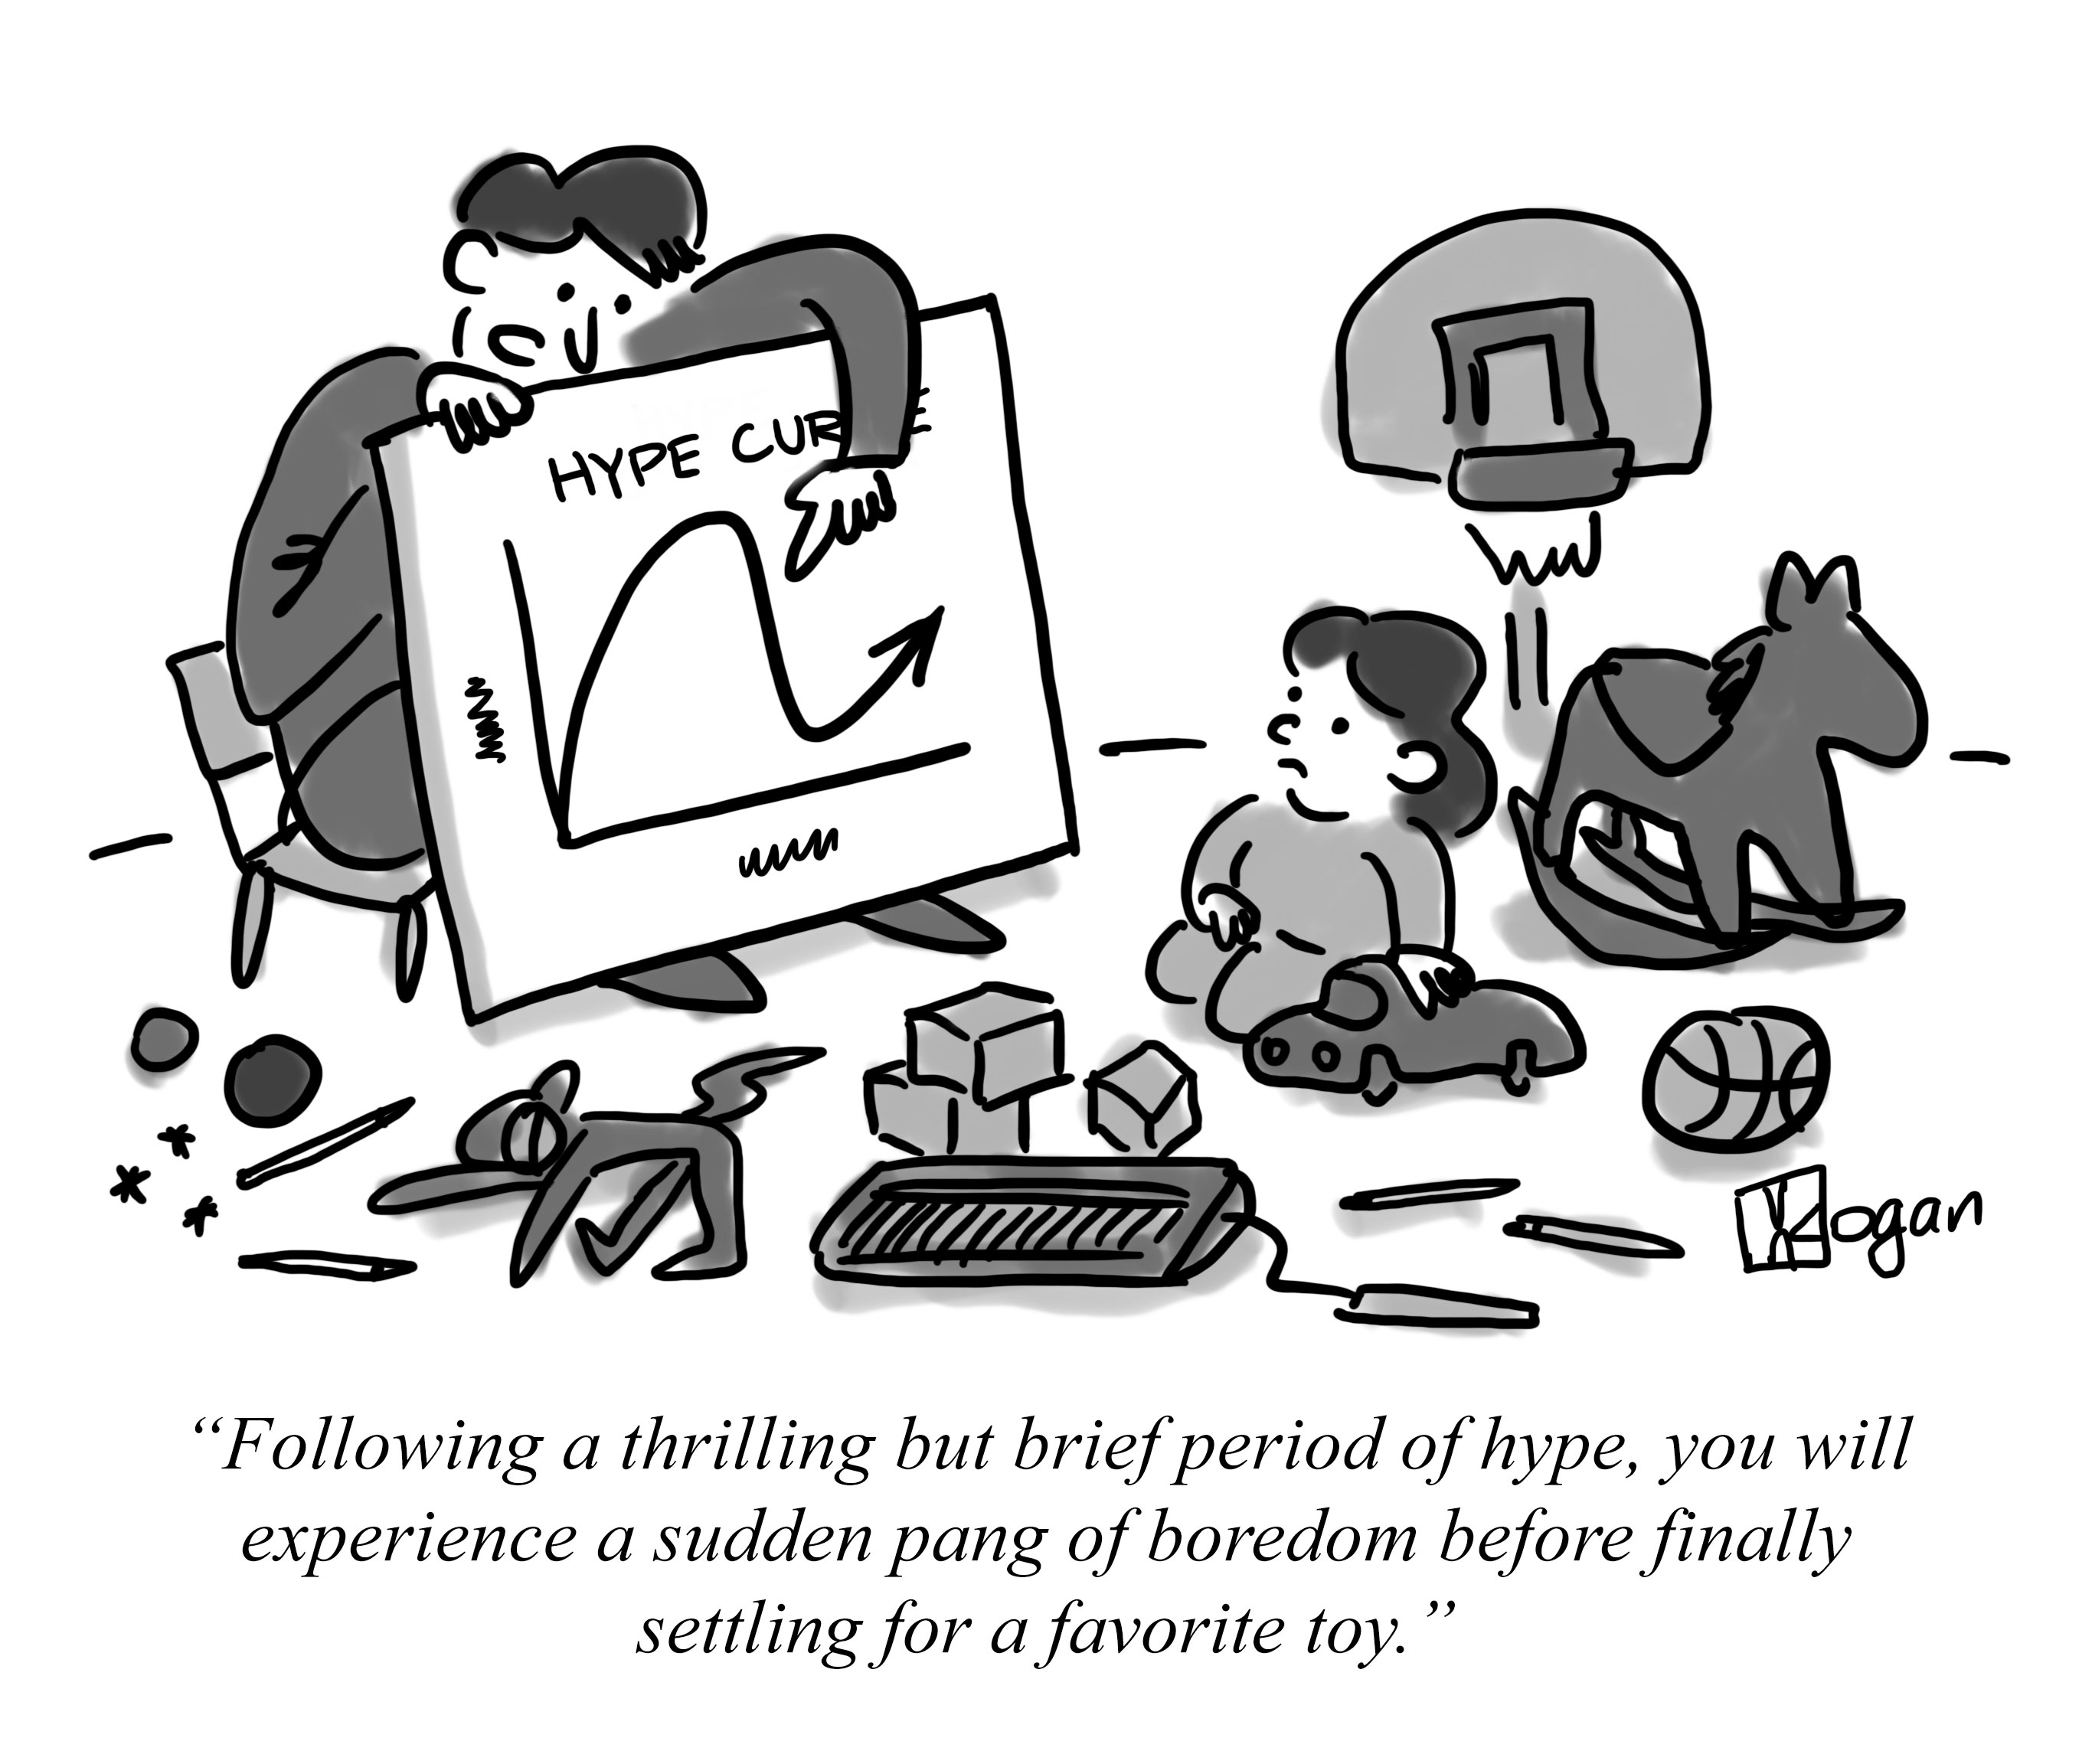 Cartoon about the hype of Artificial Intelligence